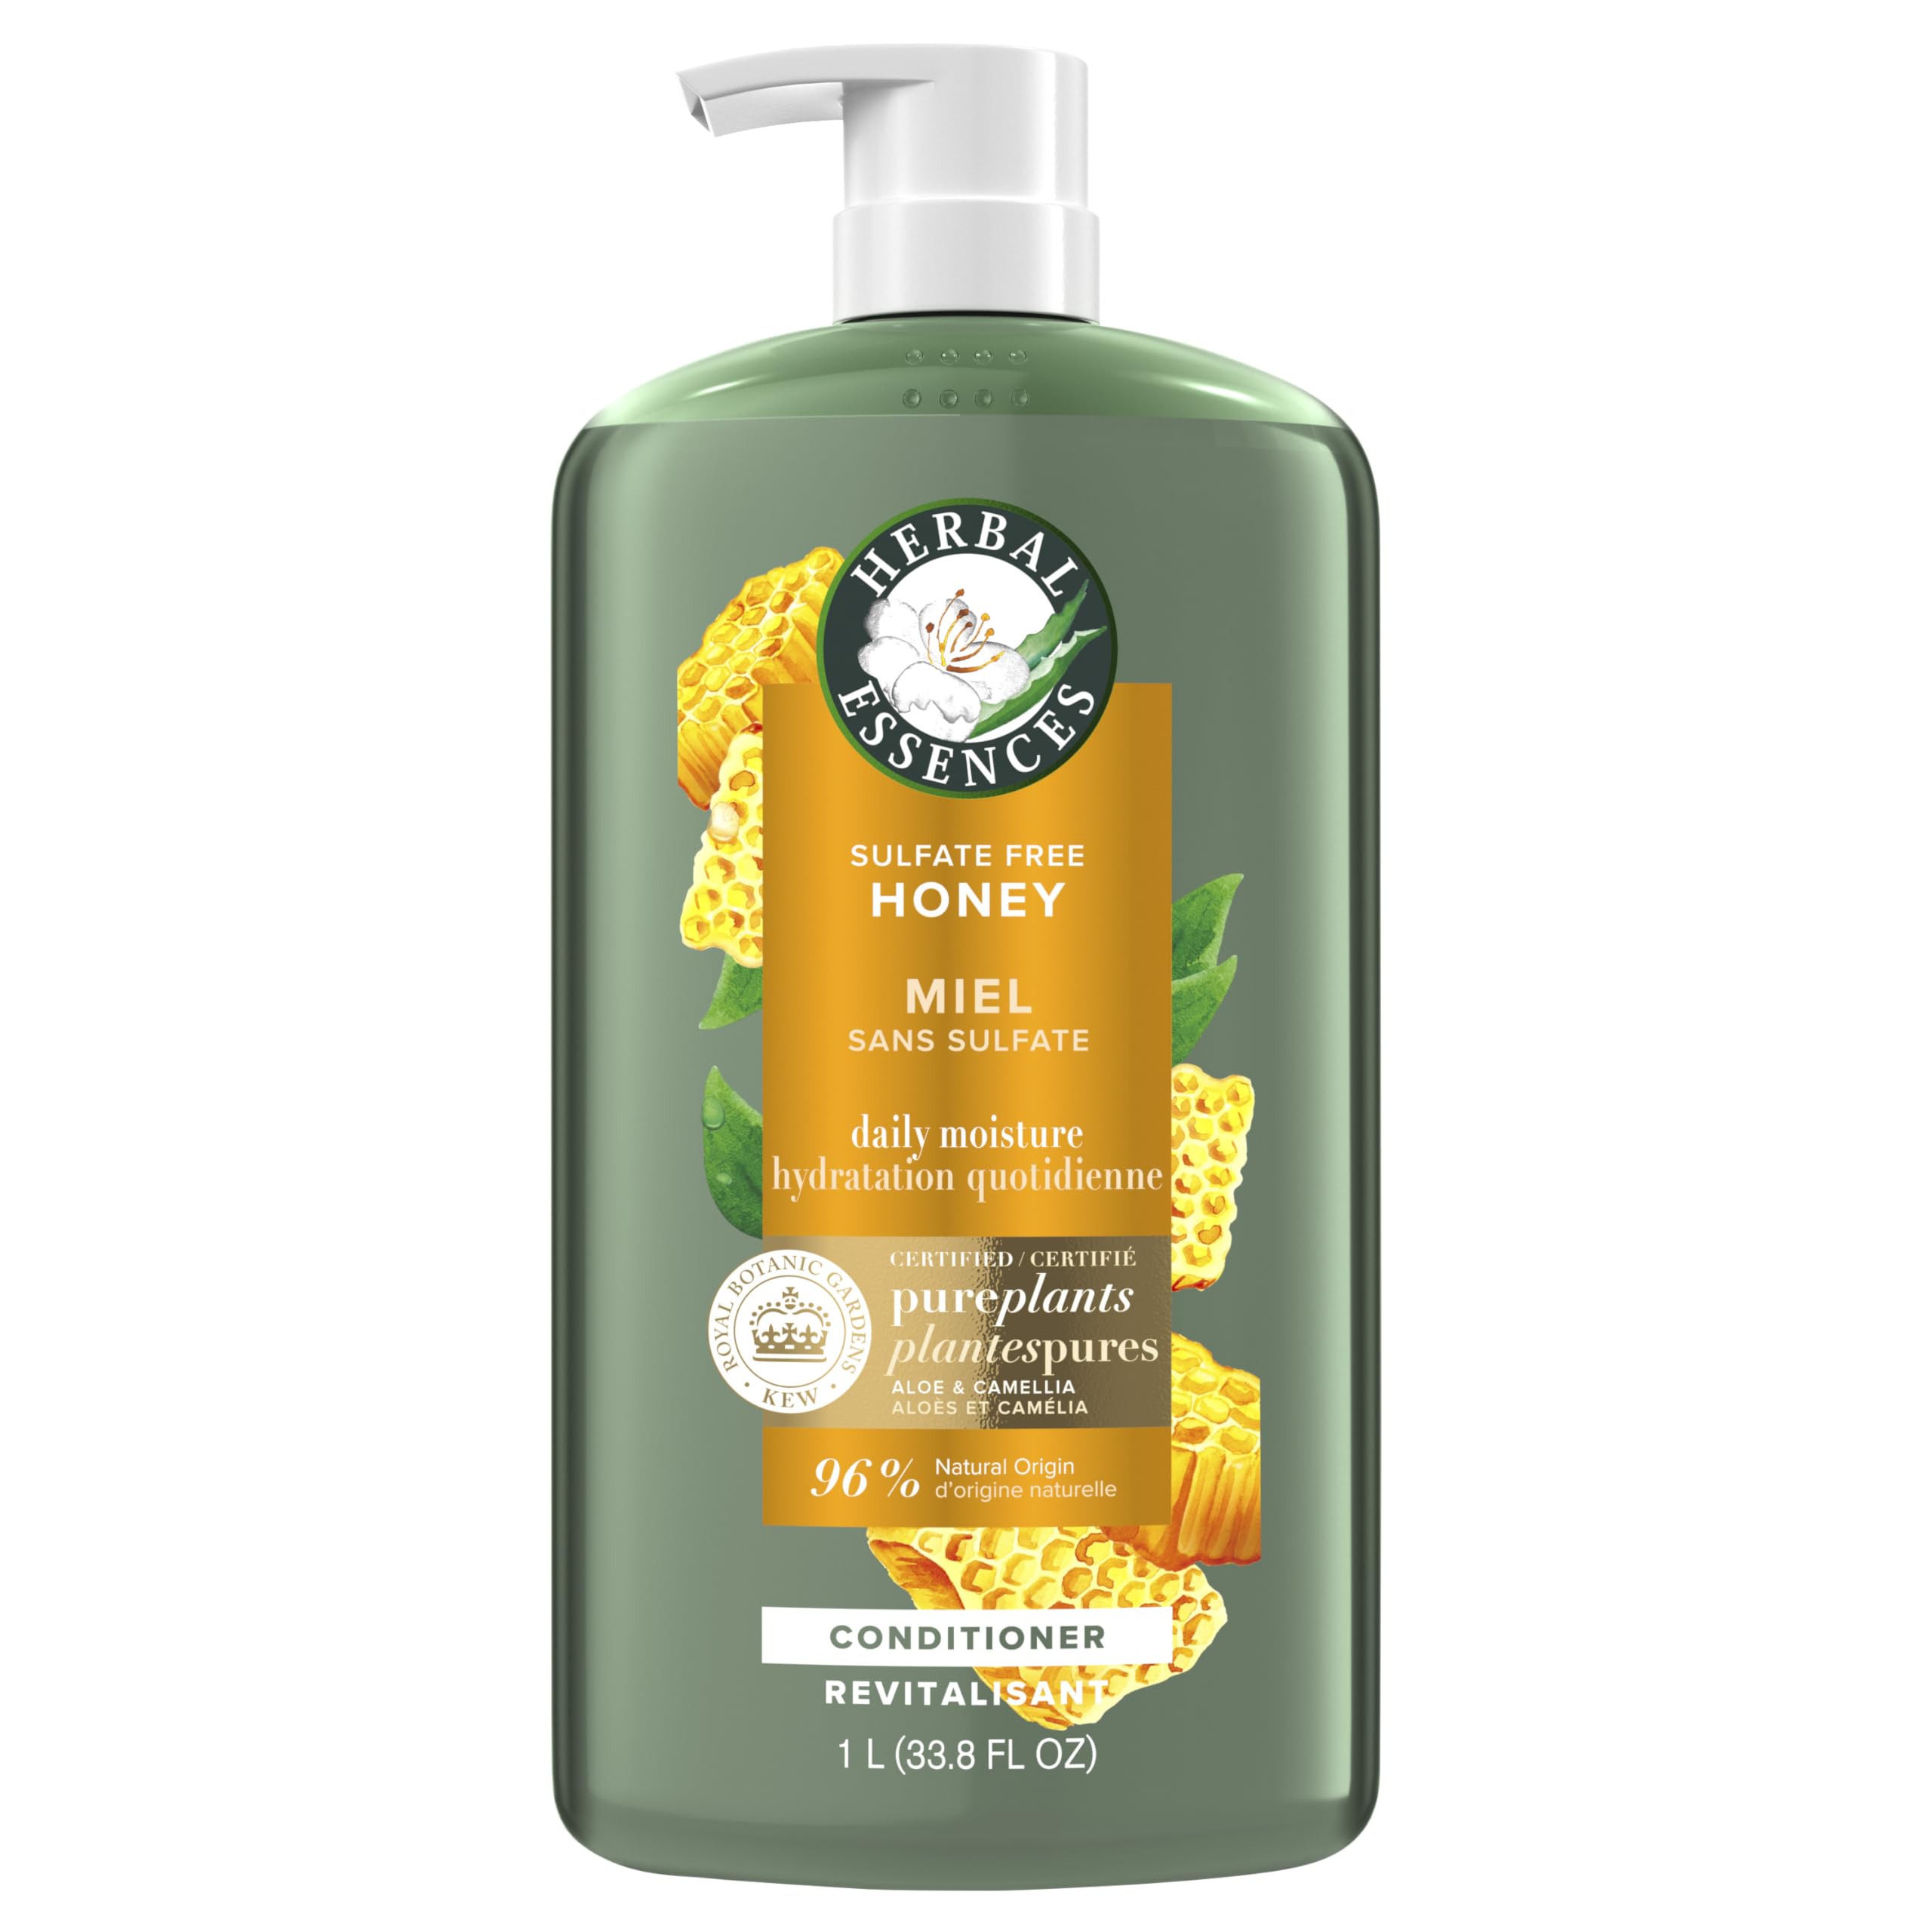 Herbal Essences Honey Daily Moisture Conditioner, Protects and Nourishes Dry Hair, Hydrating Conditioner with Certified Camellia Oil and Aloe Vera, Moisturizing and Safe For All Hair Types, 33.8oz